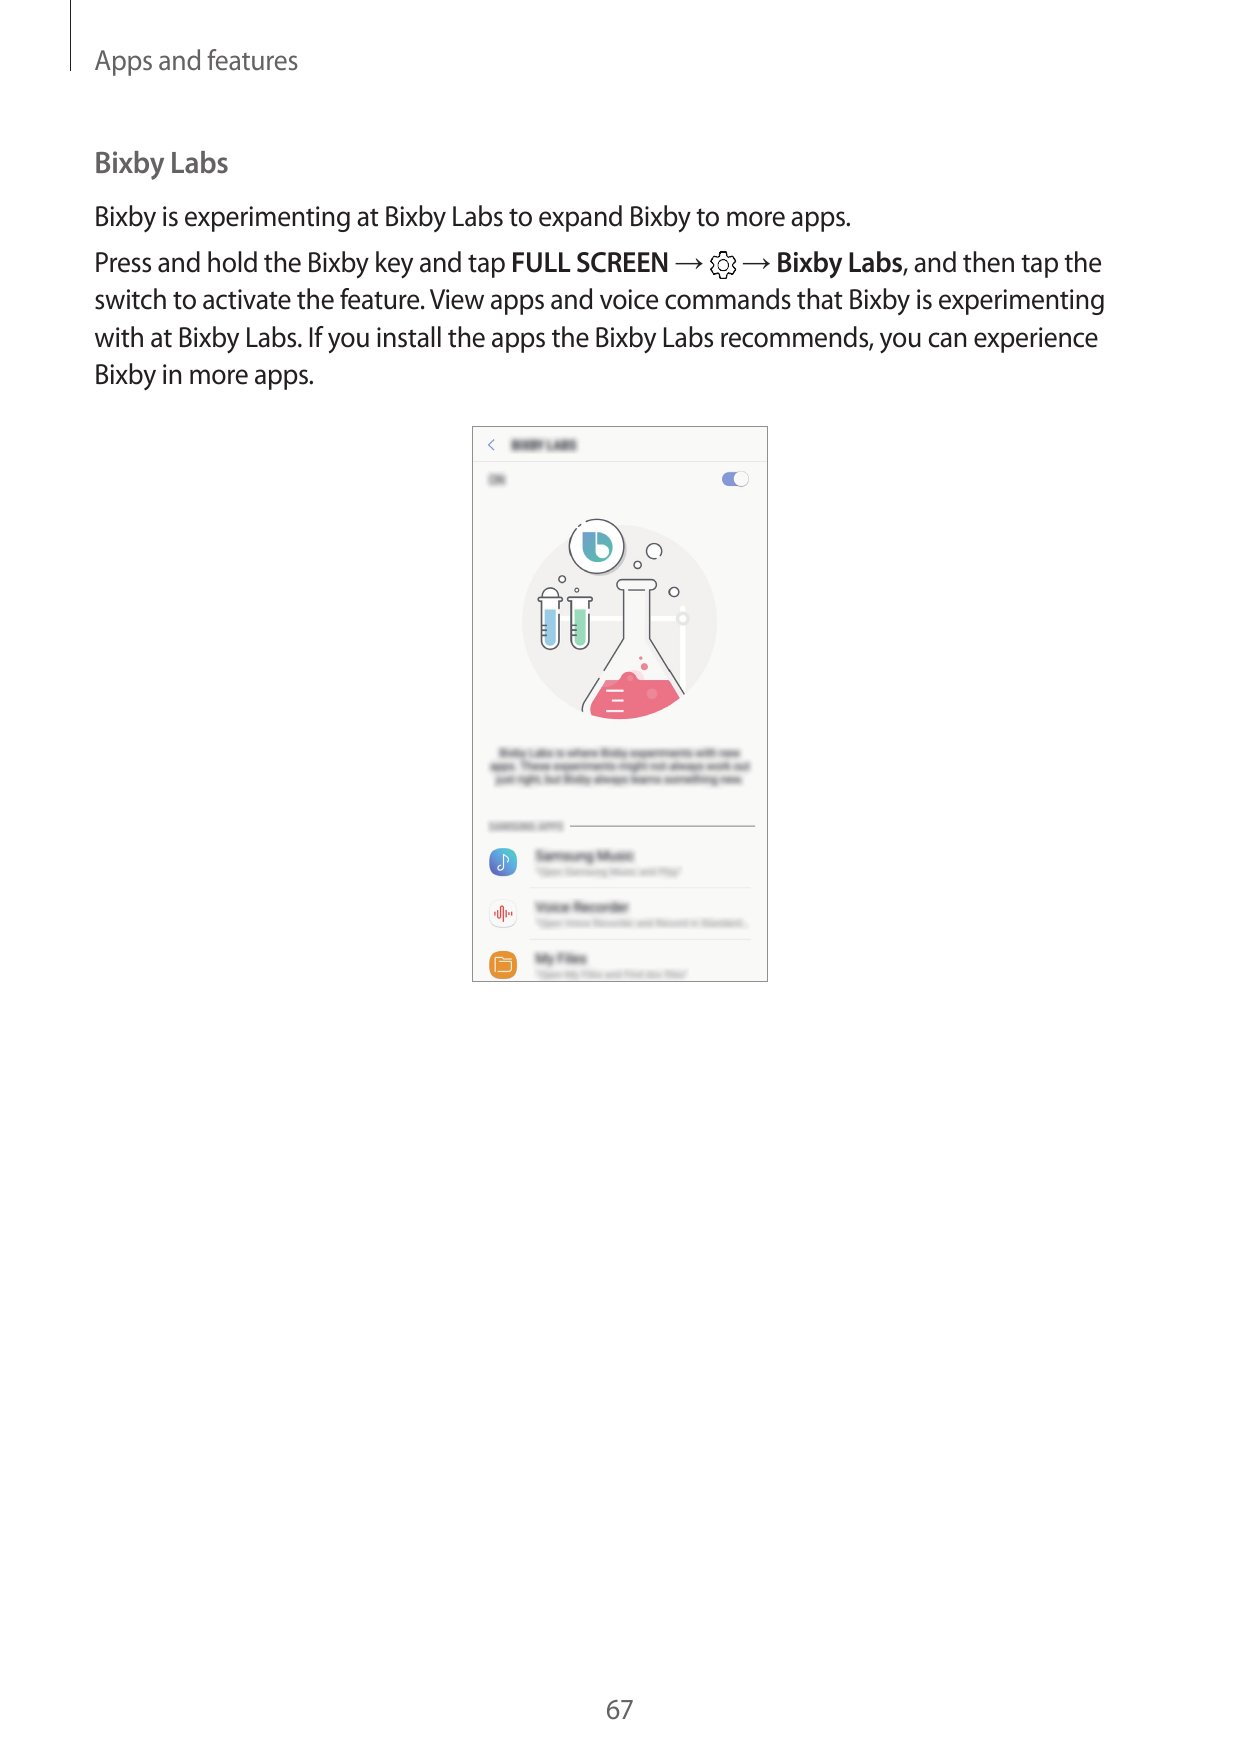 Apps and featuresBixby LabsBixby is experimenting at Bixby Labs to expand Bixby to more apps.Press and hold the Bixby key and ta